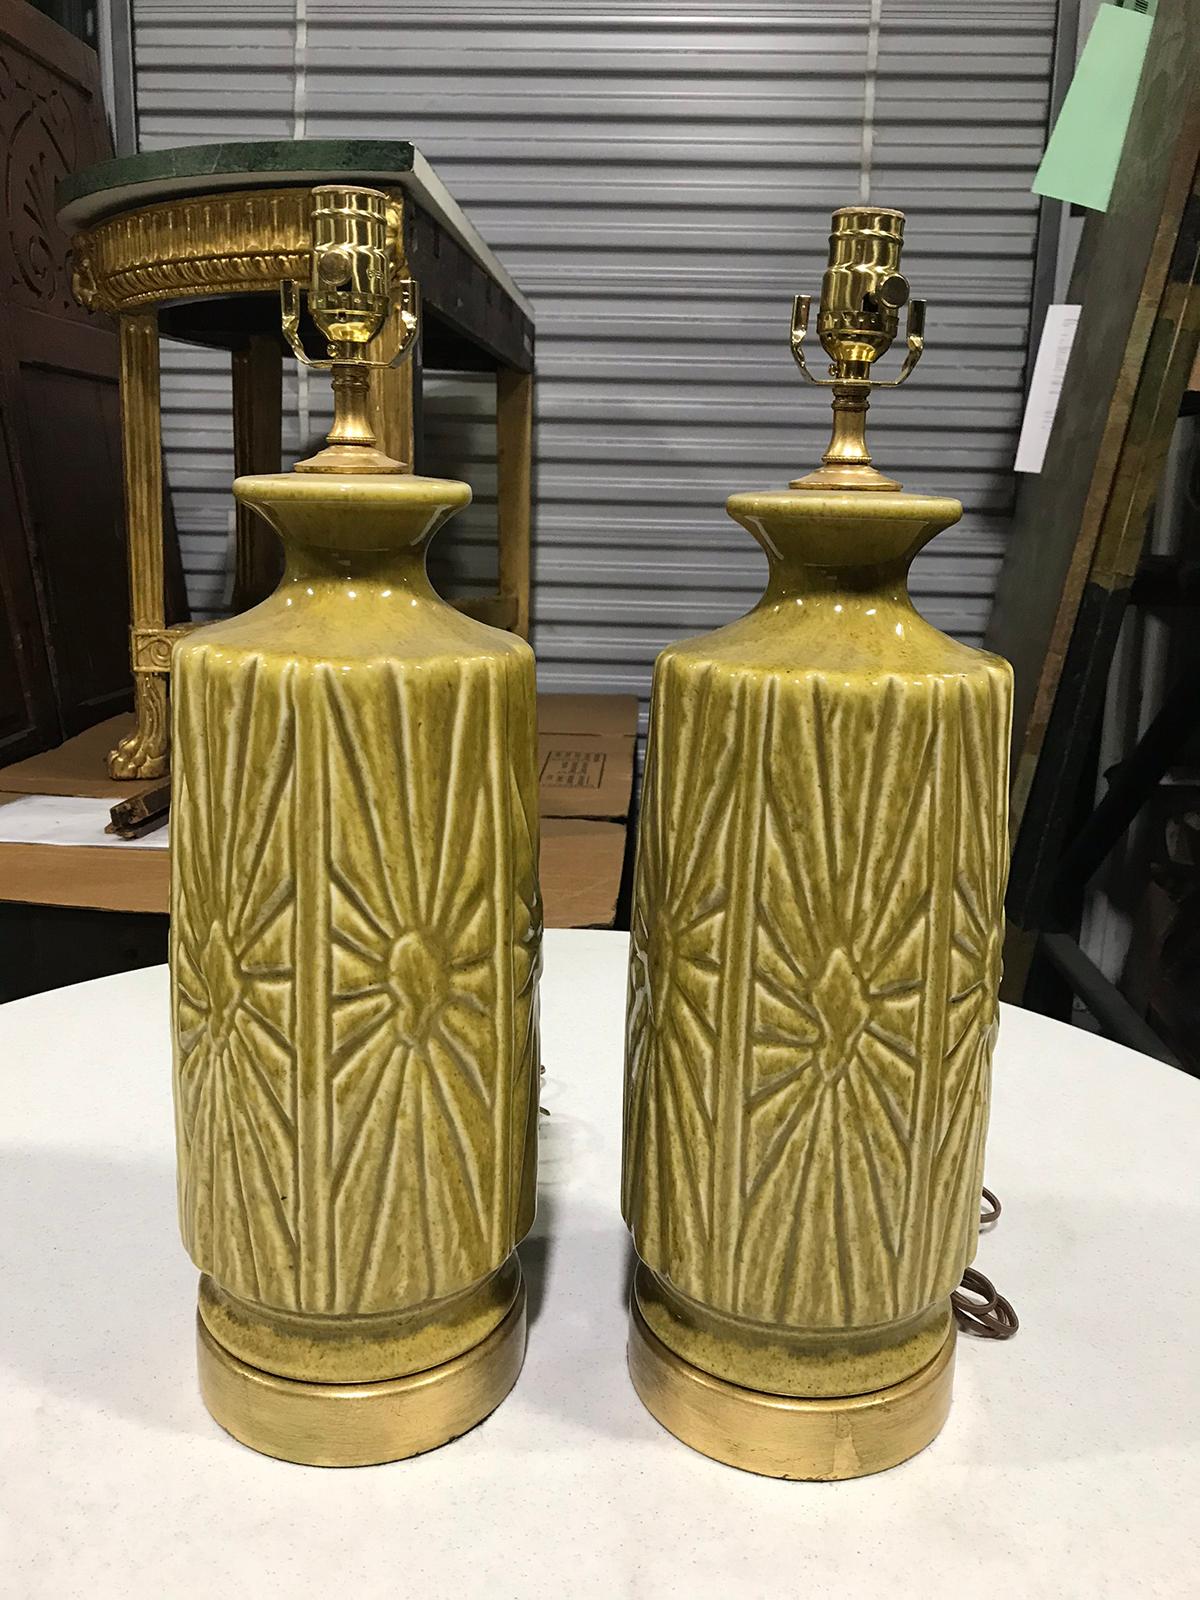 Pair of mid-20th century pottery lamps on custom gilt bases
New wiring.